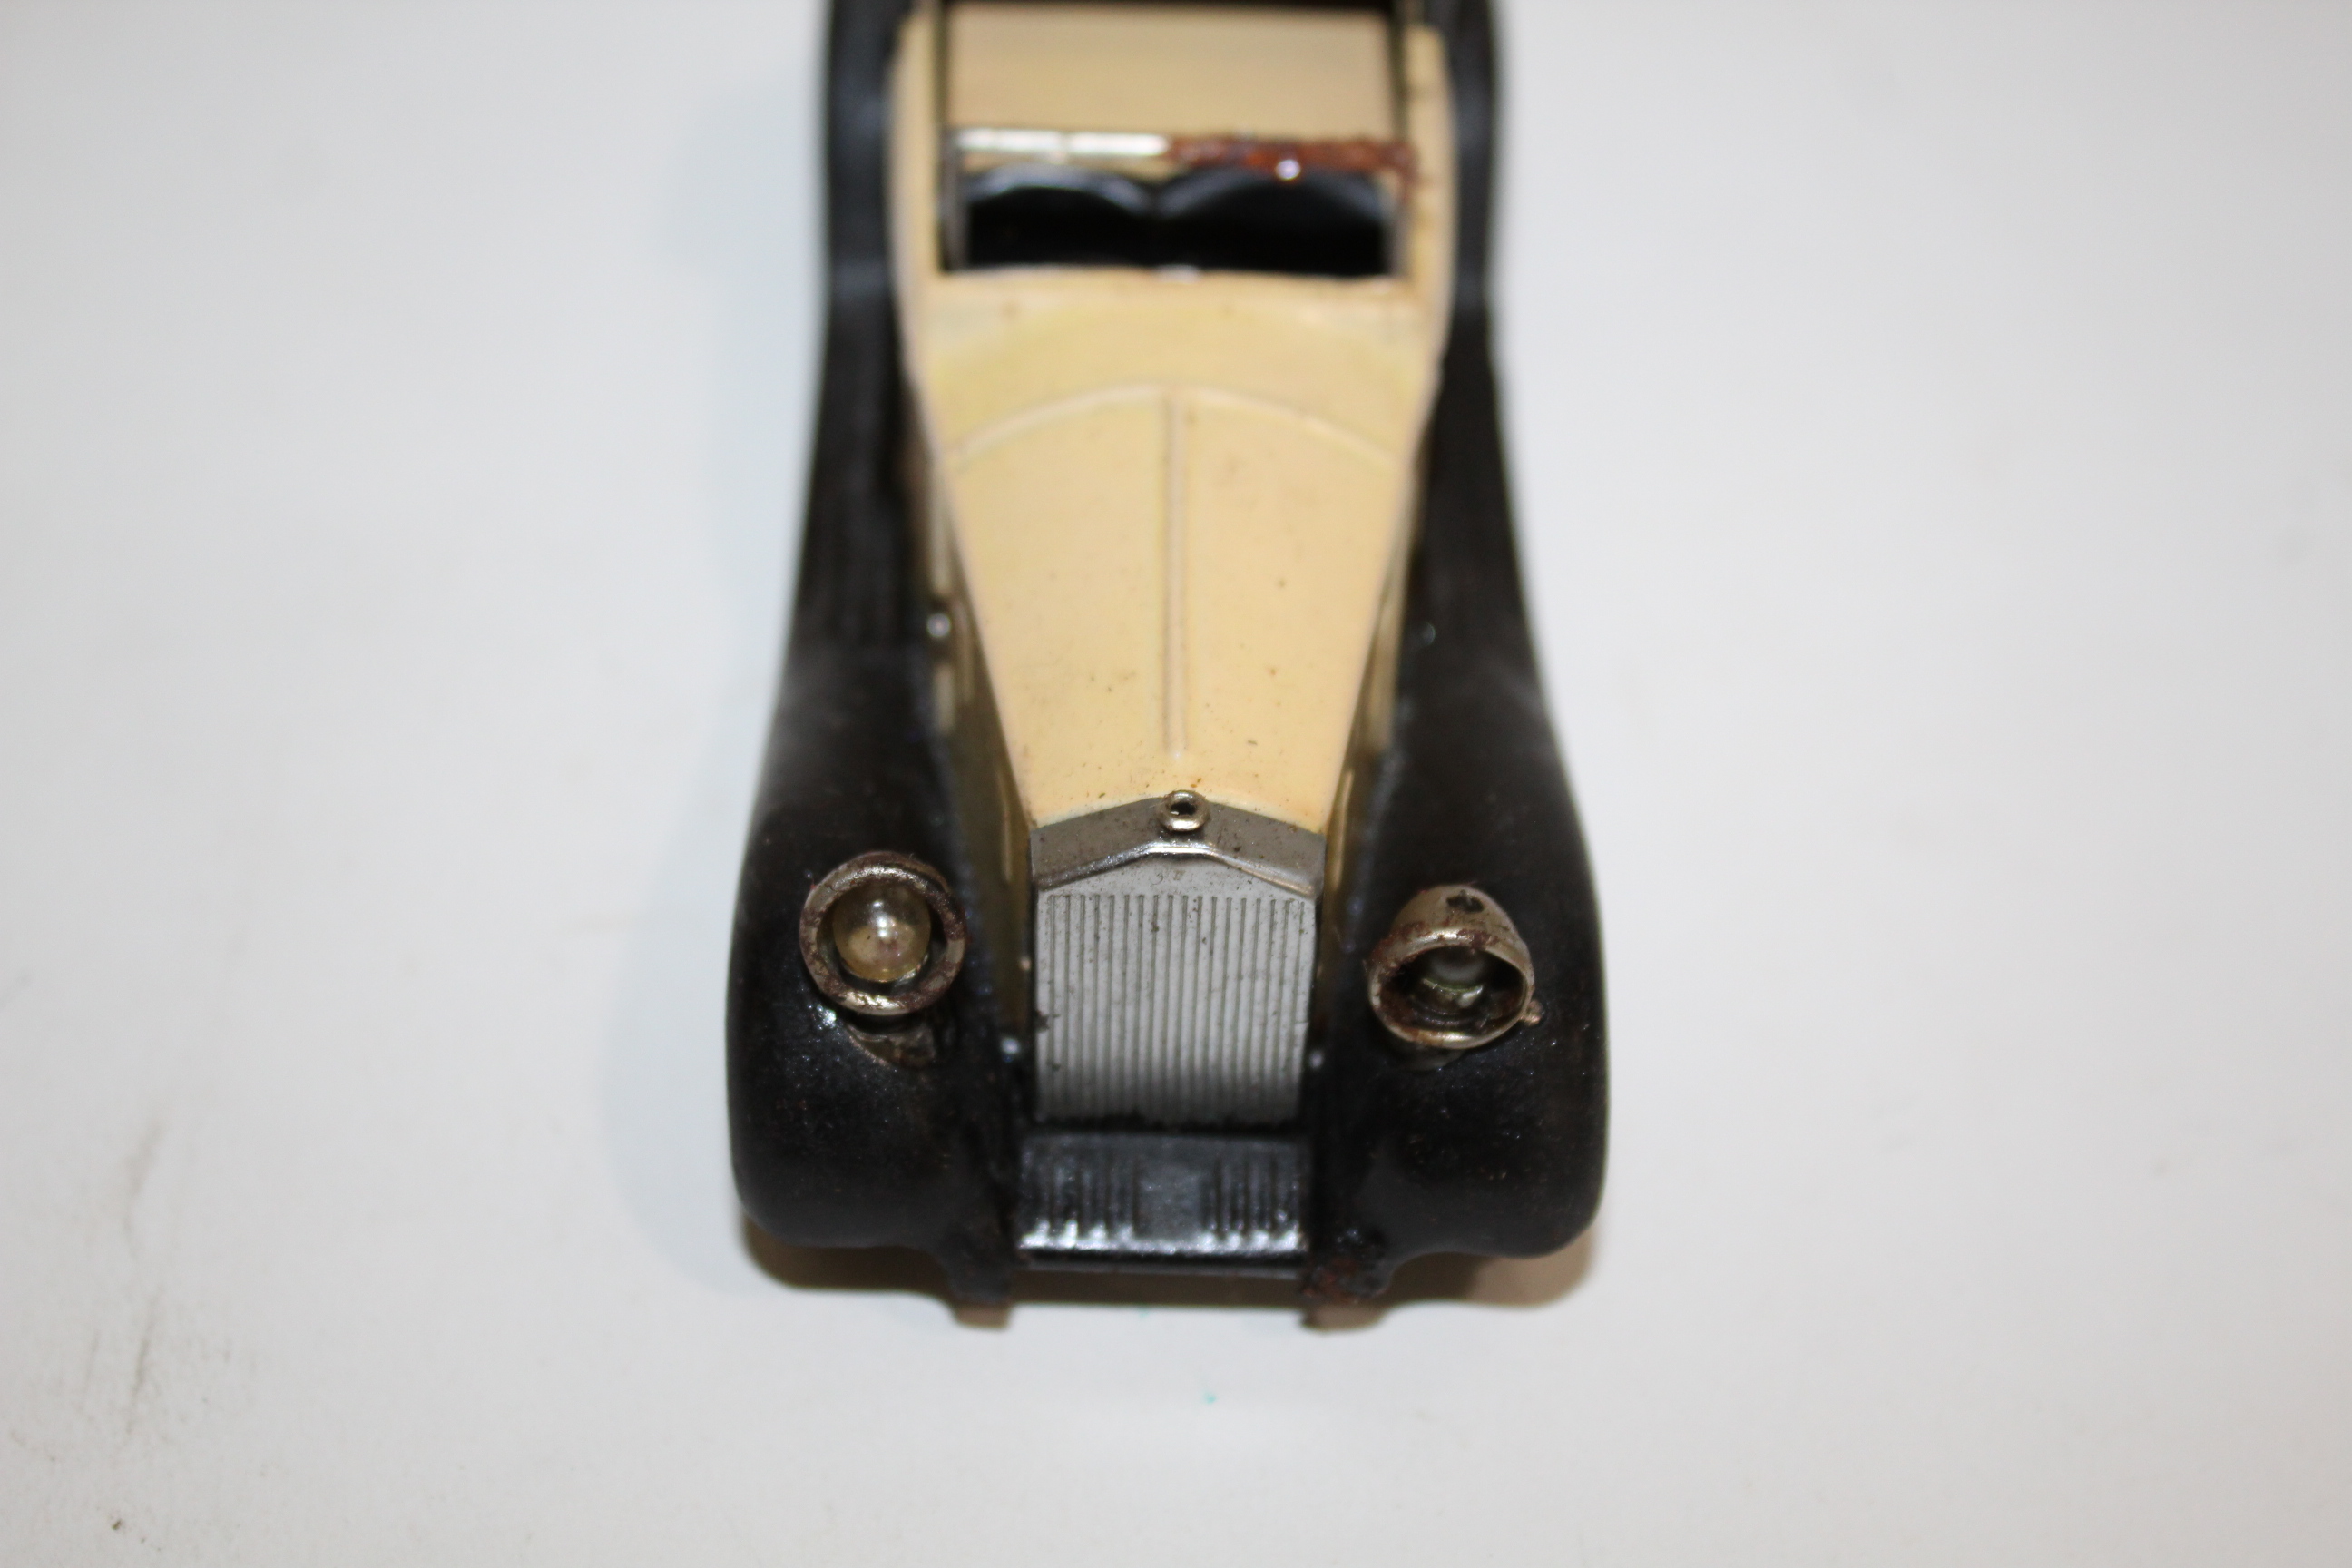 RARE TRIANG MINIC ROLLS ROYCE SEDANCA - ELECTRIC HEADLAMPS Model No 50M, with a black hood and wings - Image 9 of 14